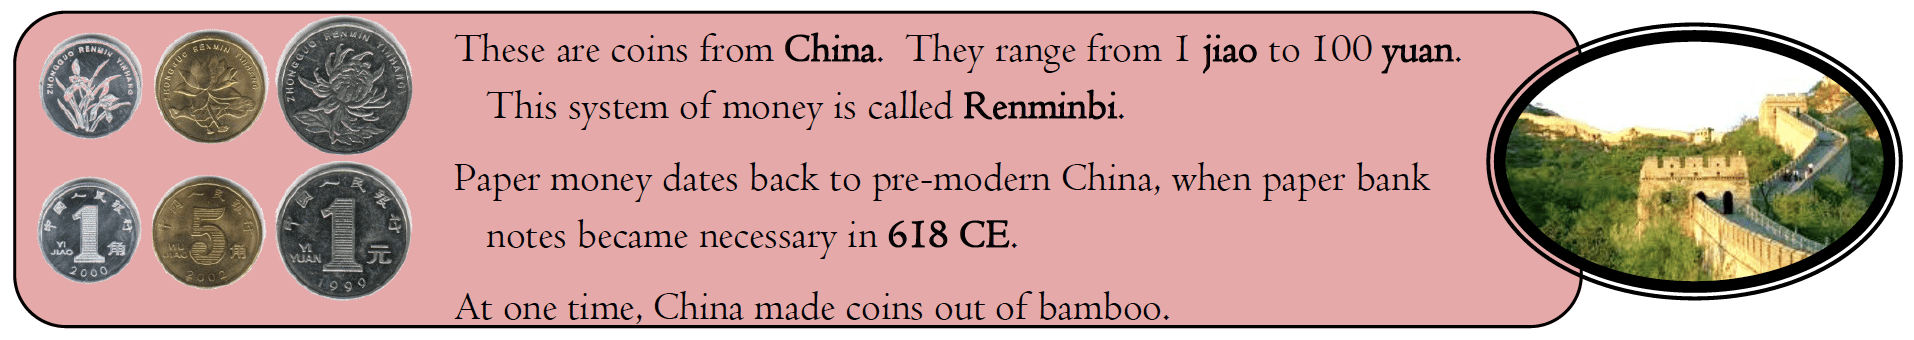 These are coins from China. They range from I jiao to 100 yuan. This system of money is called Renminbi. Paper money dates back to pre-modern China, when paper bank notes became necessary in 618 CE. At one time, China made coins out of bamboo.